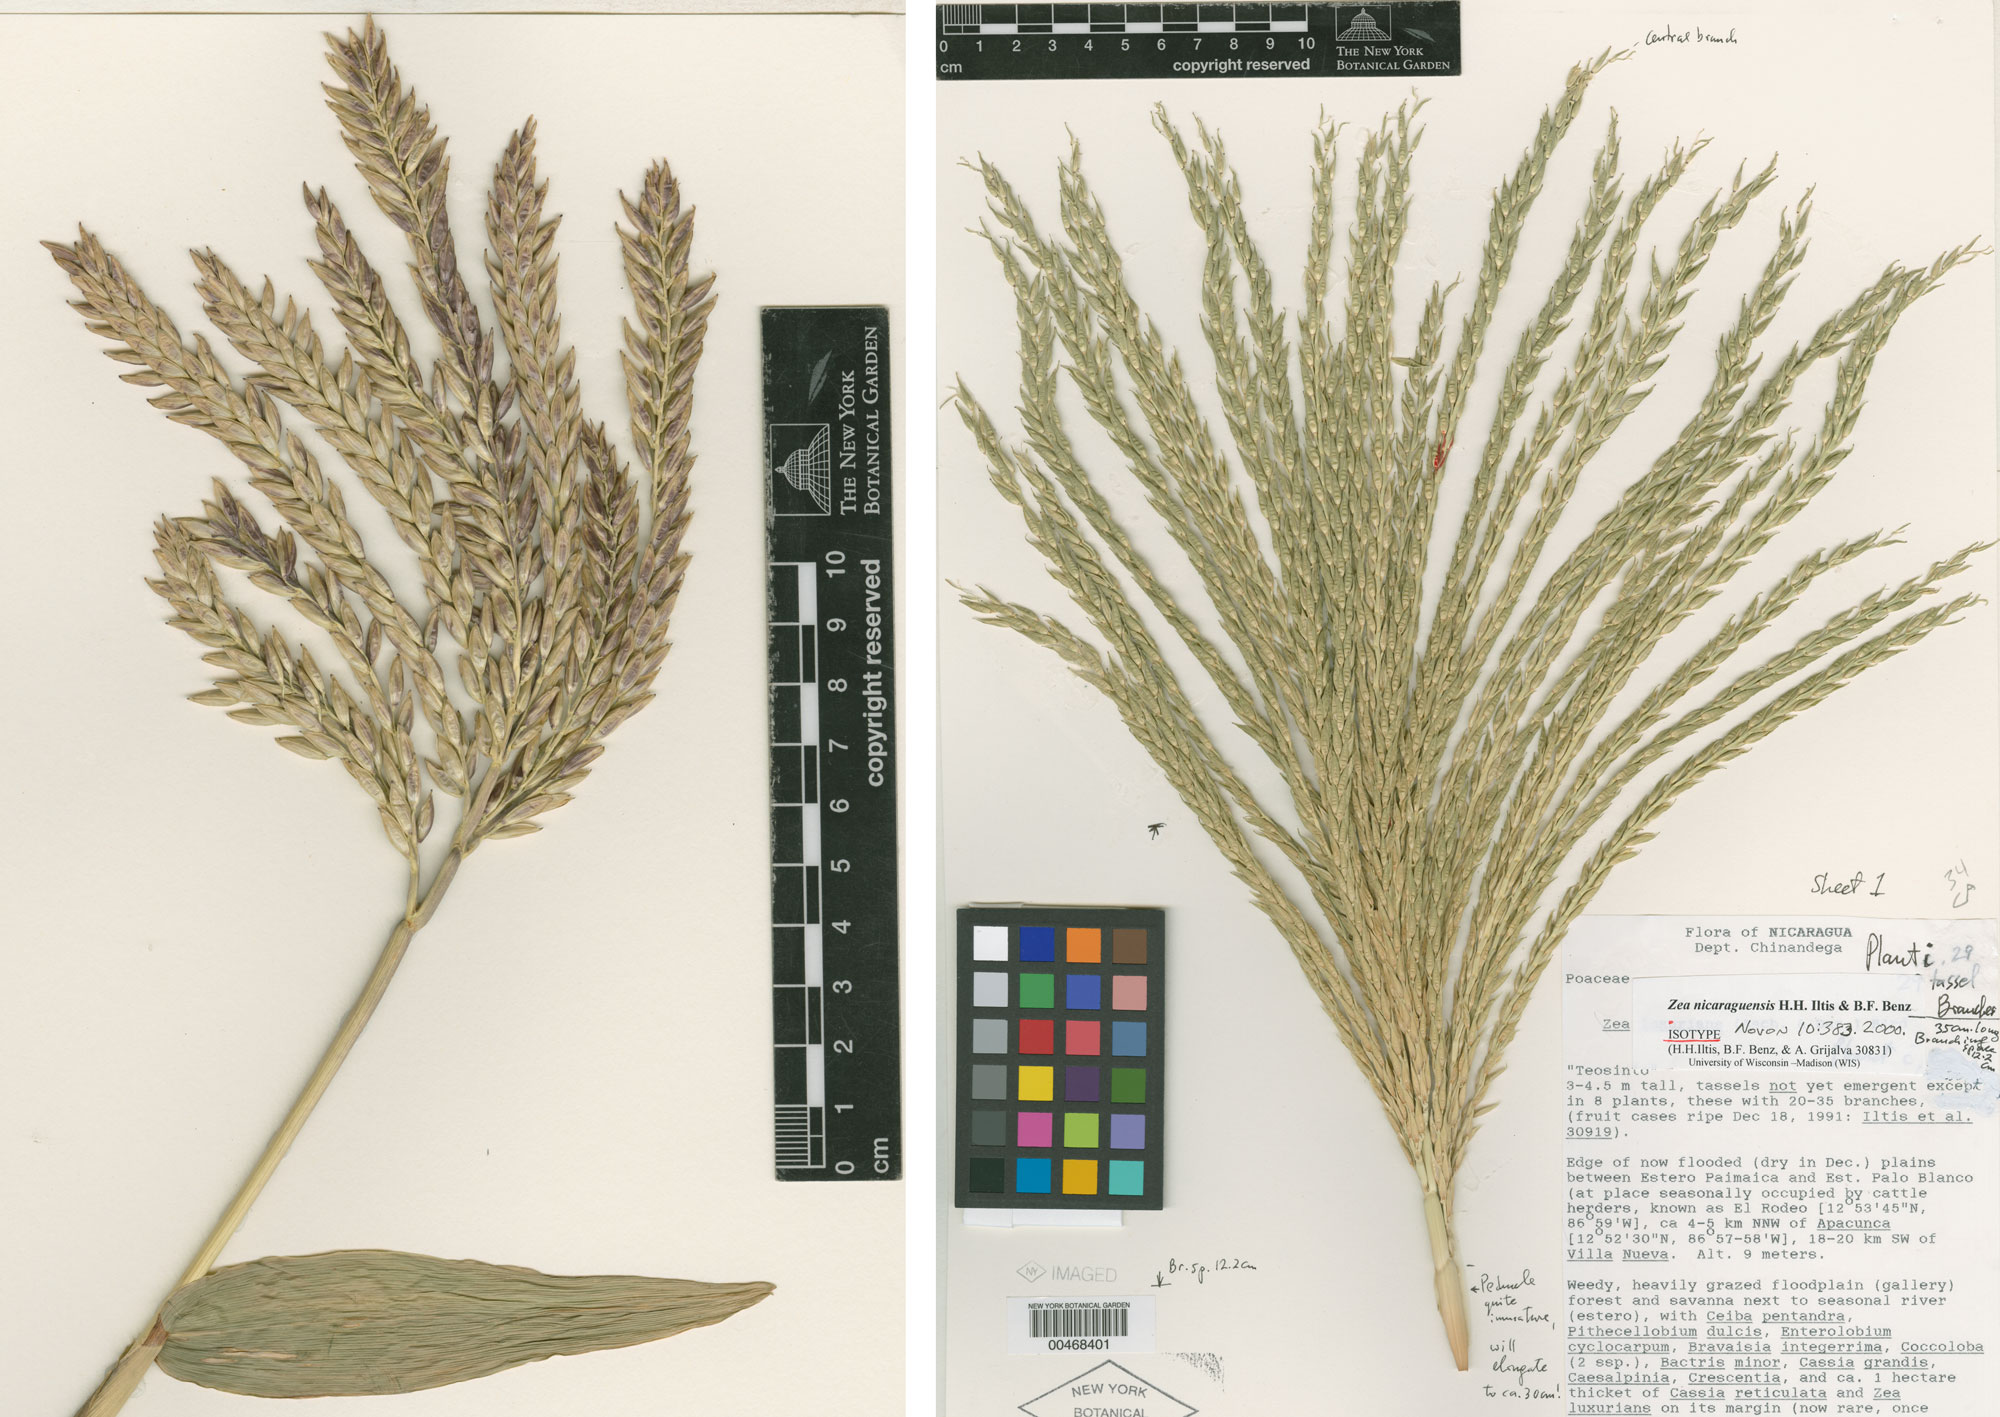 2-panel figure showing photos of staminate inflorescences on teosinte plants. In both cases, the plants are preserved on herbarium sheets. Left: A cluster of branches bearing male spikelets form a broom-like structure at the end of a stem. Right: Another broomlike structure formed by inflorescence branches bearing male spikelets at the end of a stem. 